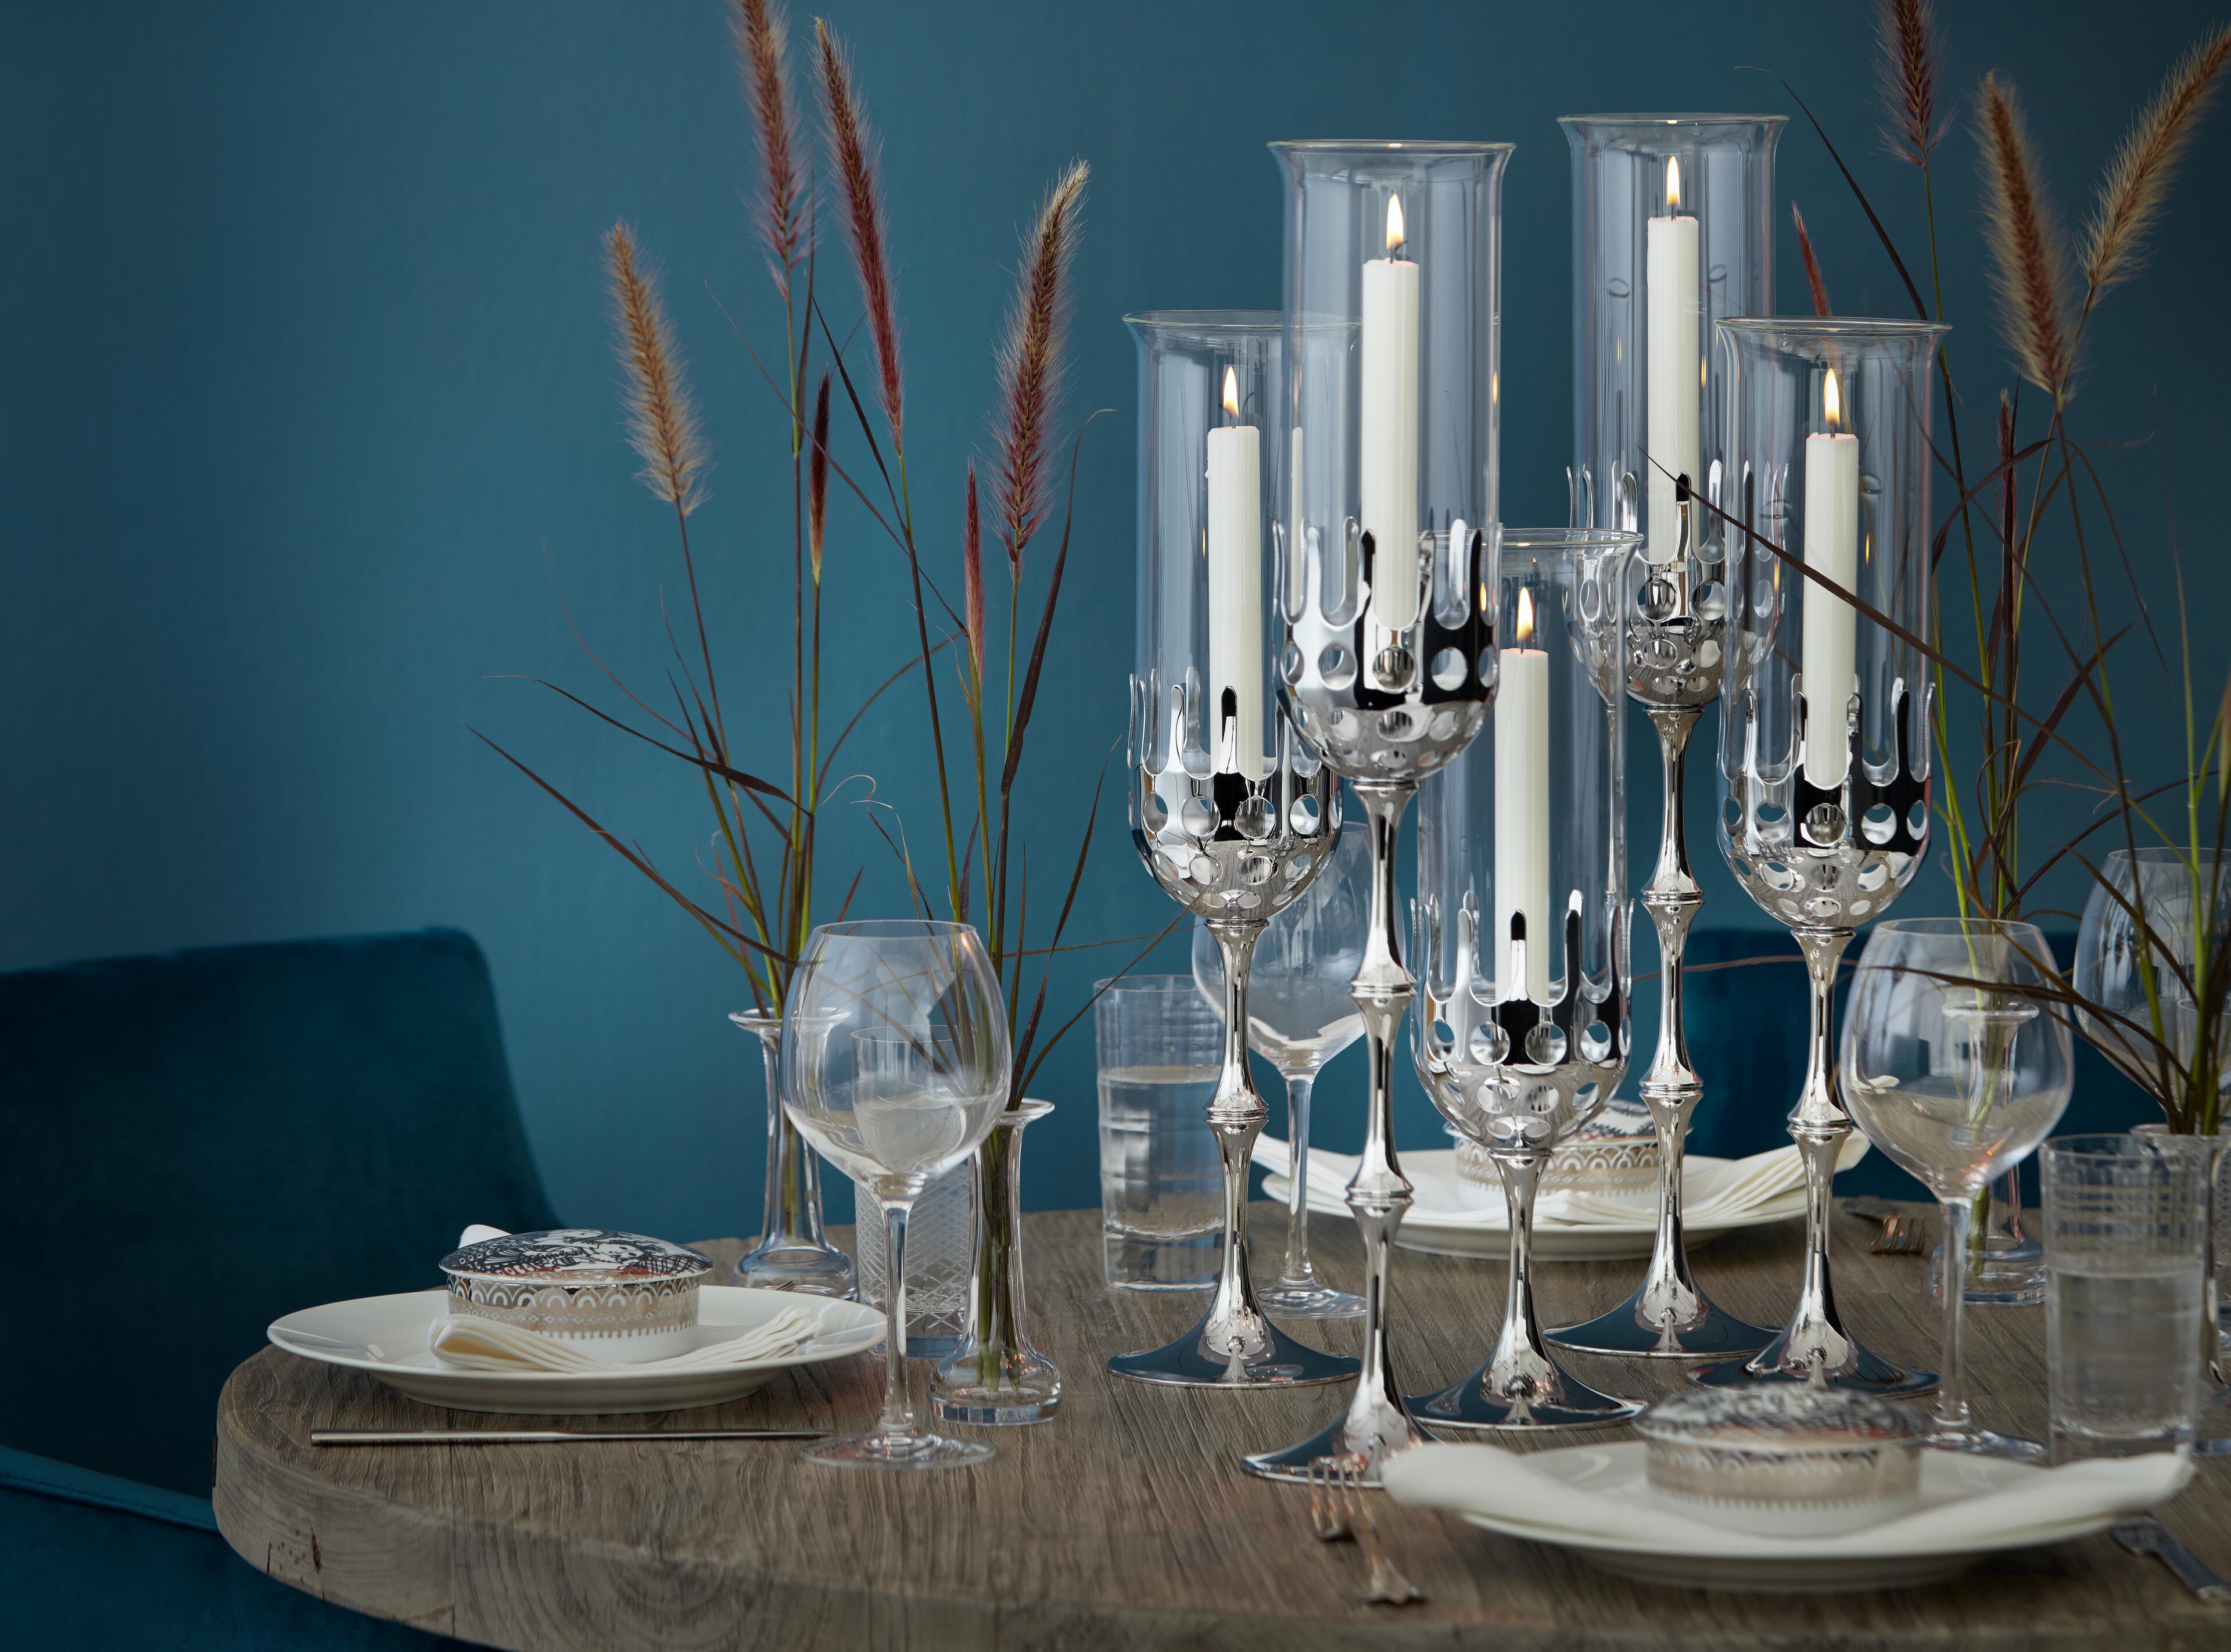 Sumptuous candlesticks from Bjørn Wiinblad on table